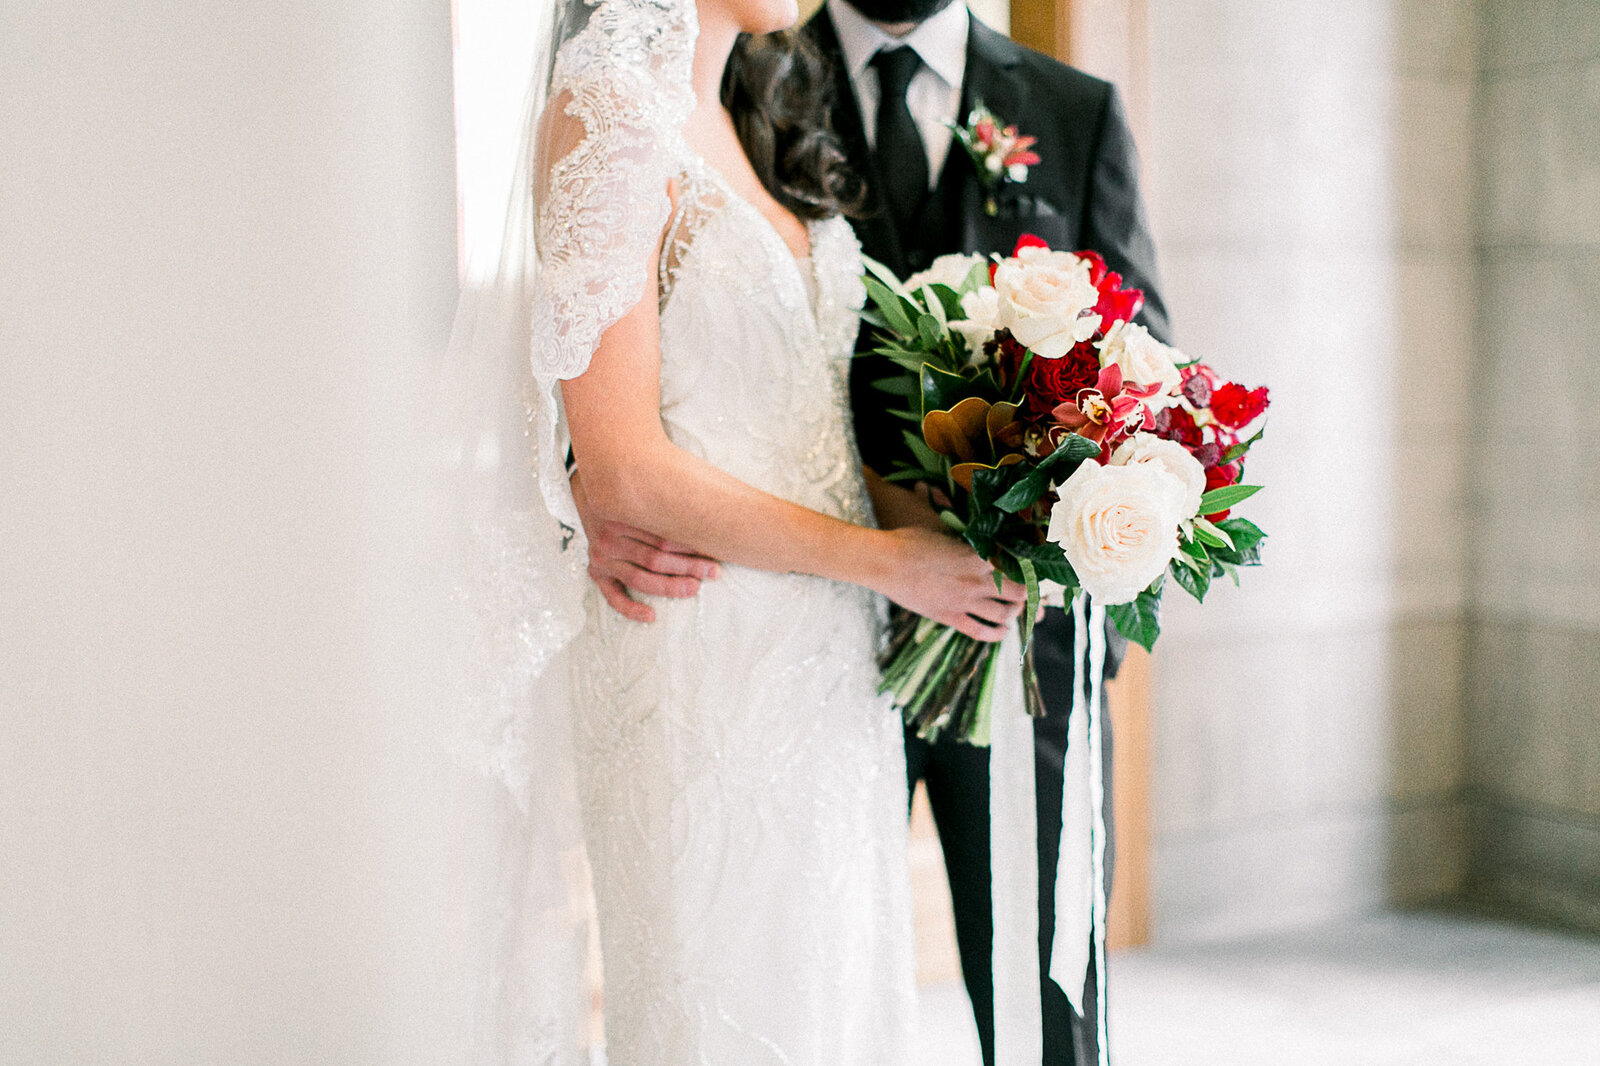 Image of a bride and groom standing side by side highlighting the wedding bouquet